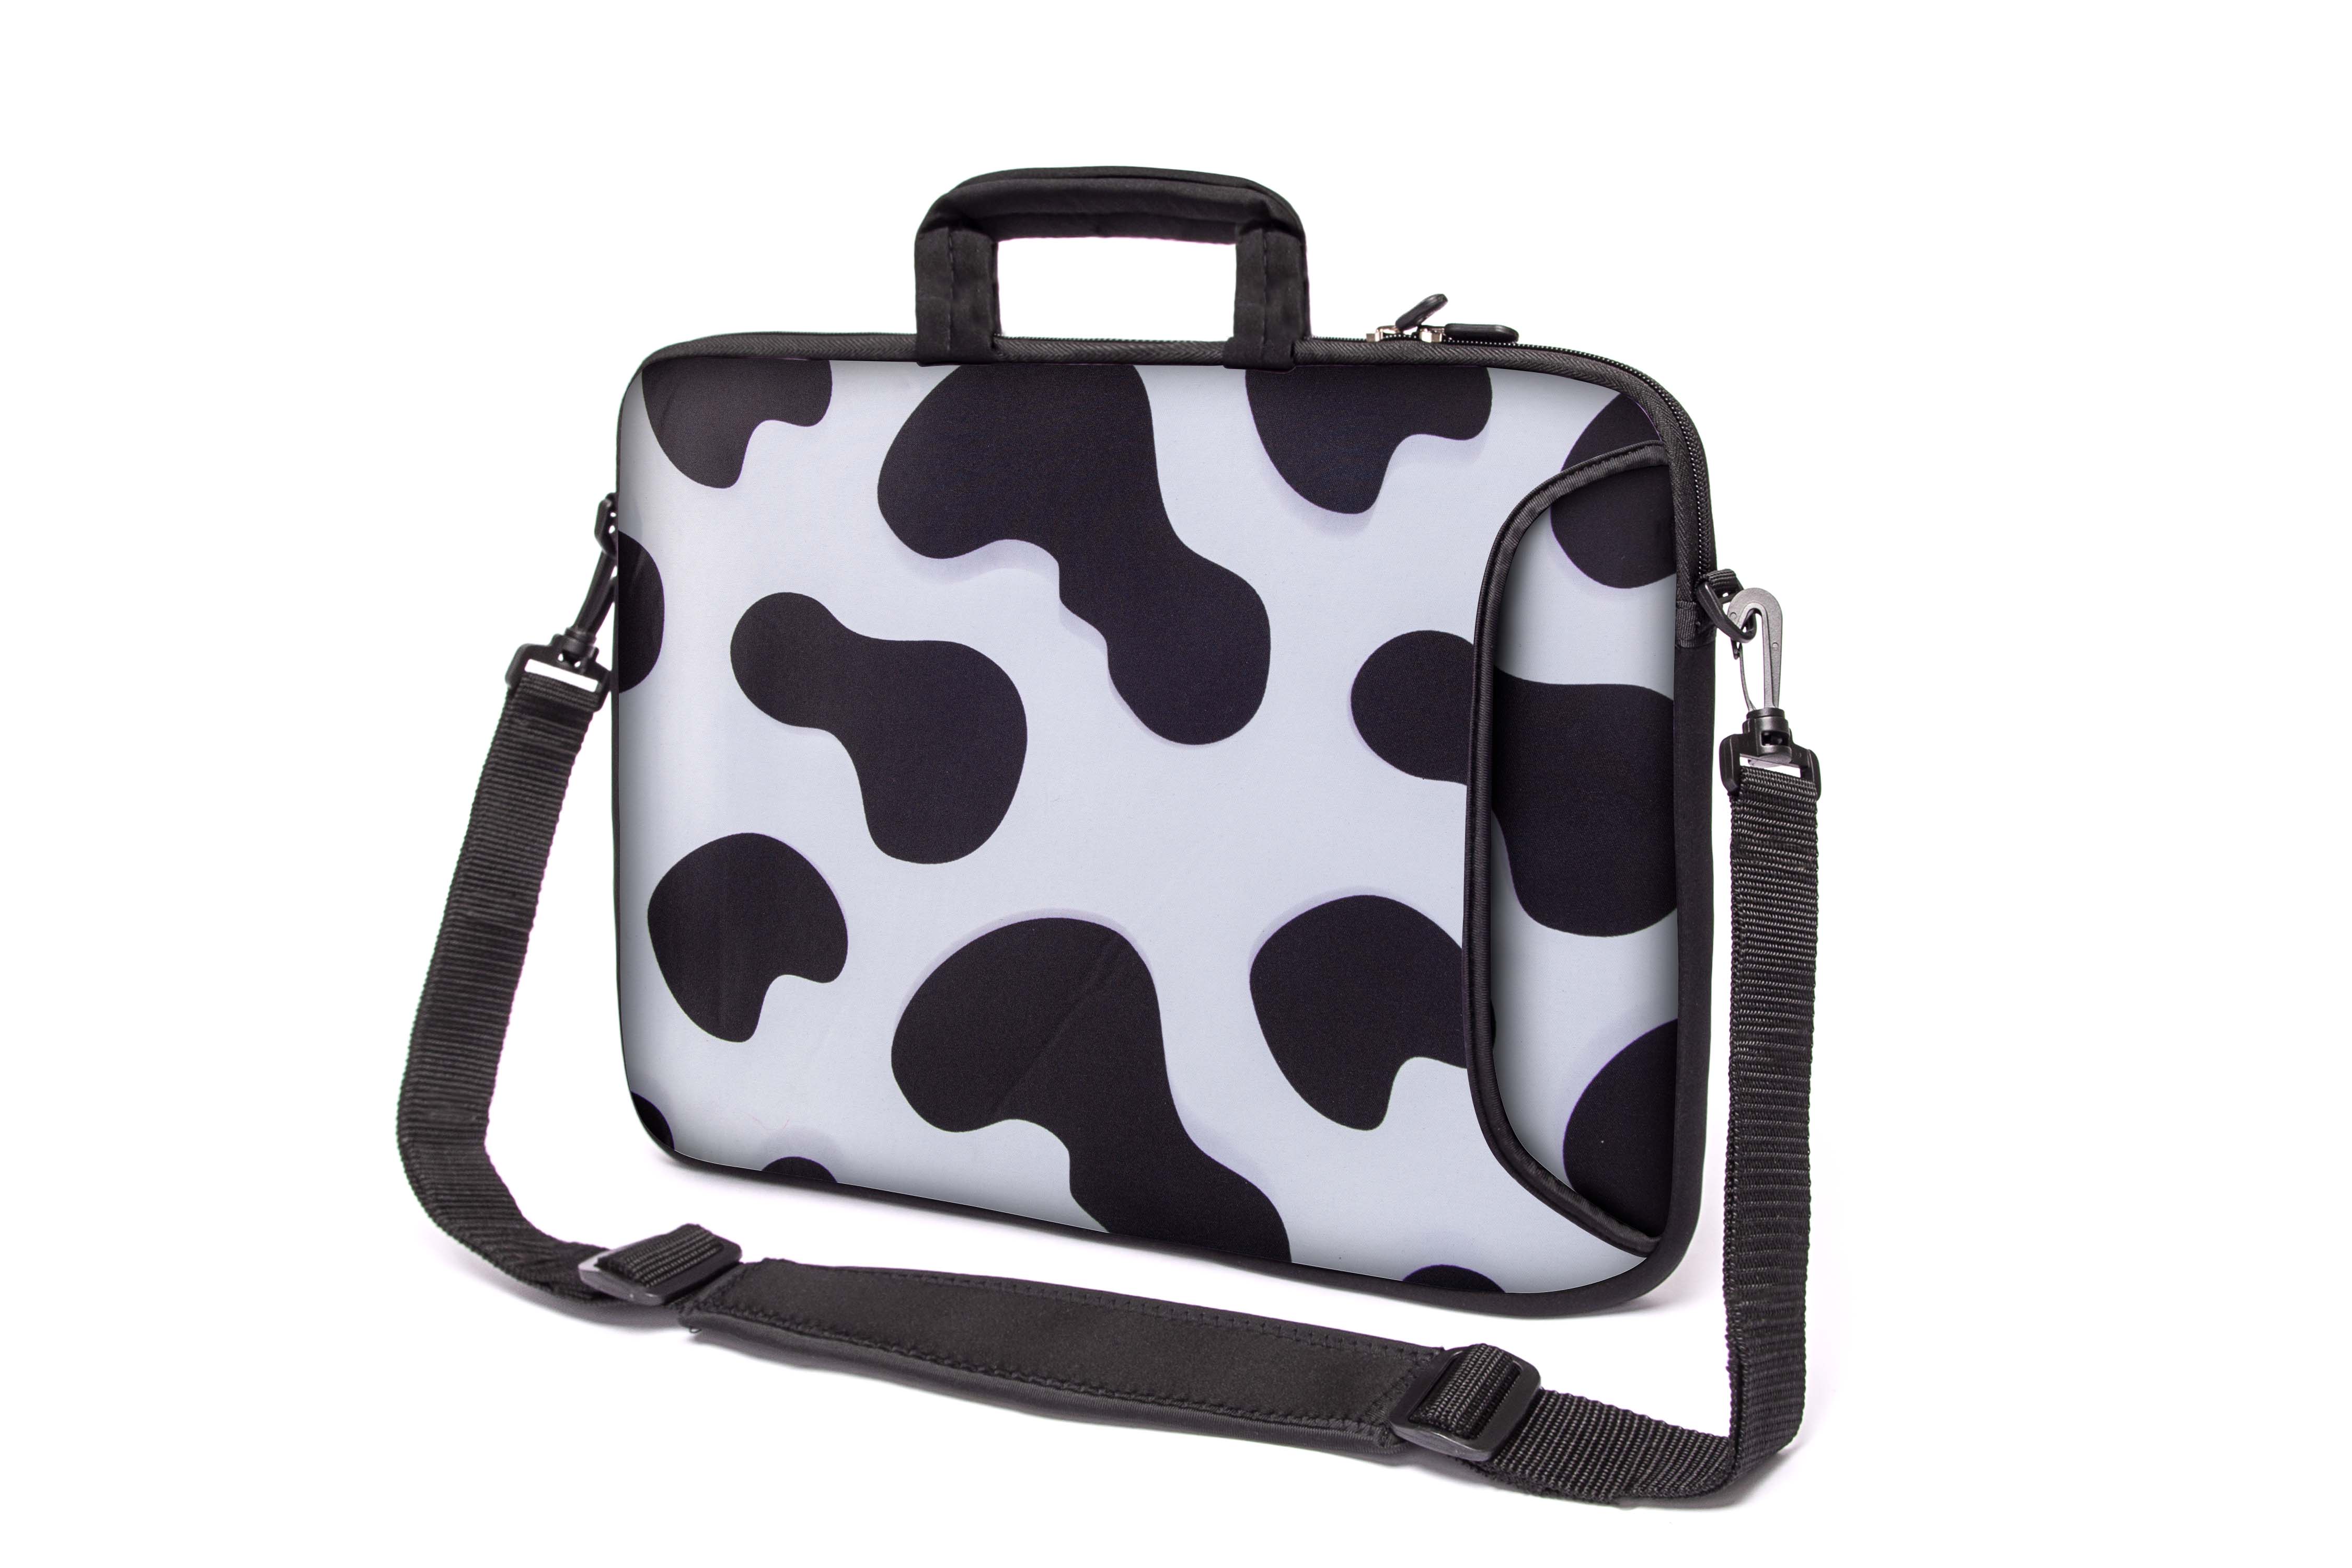 17"- 17.3" (inch) LAPTOP BAG/CASE WITH HANDLE & STRAP, NEOPRENE MADE FOR LAPTOPS/NOTEBOOKS, ZIPPED*COW*